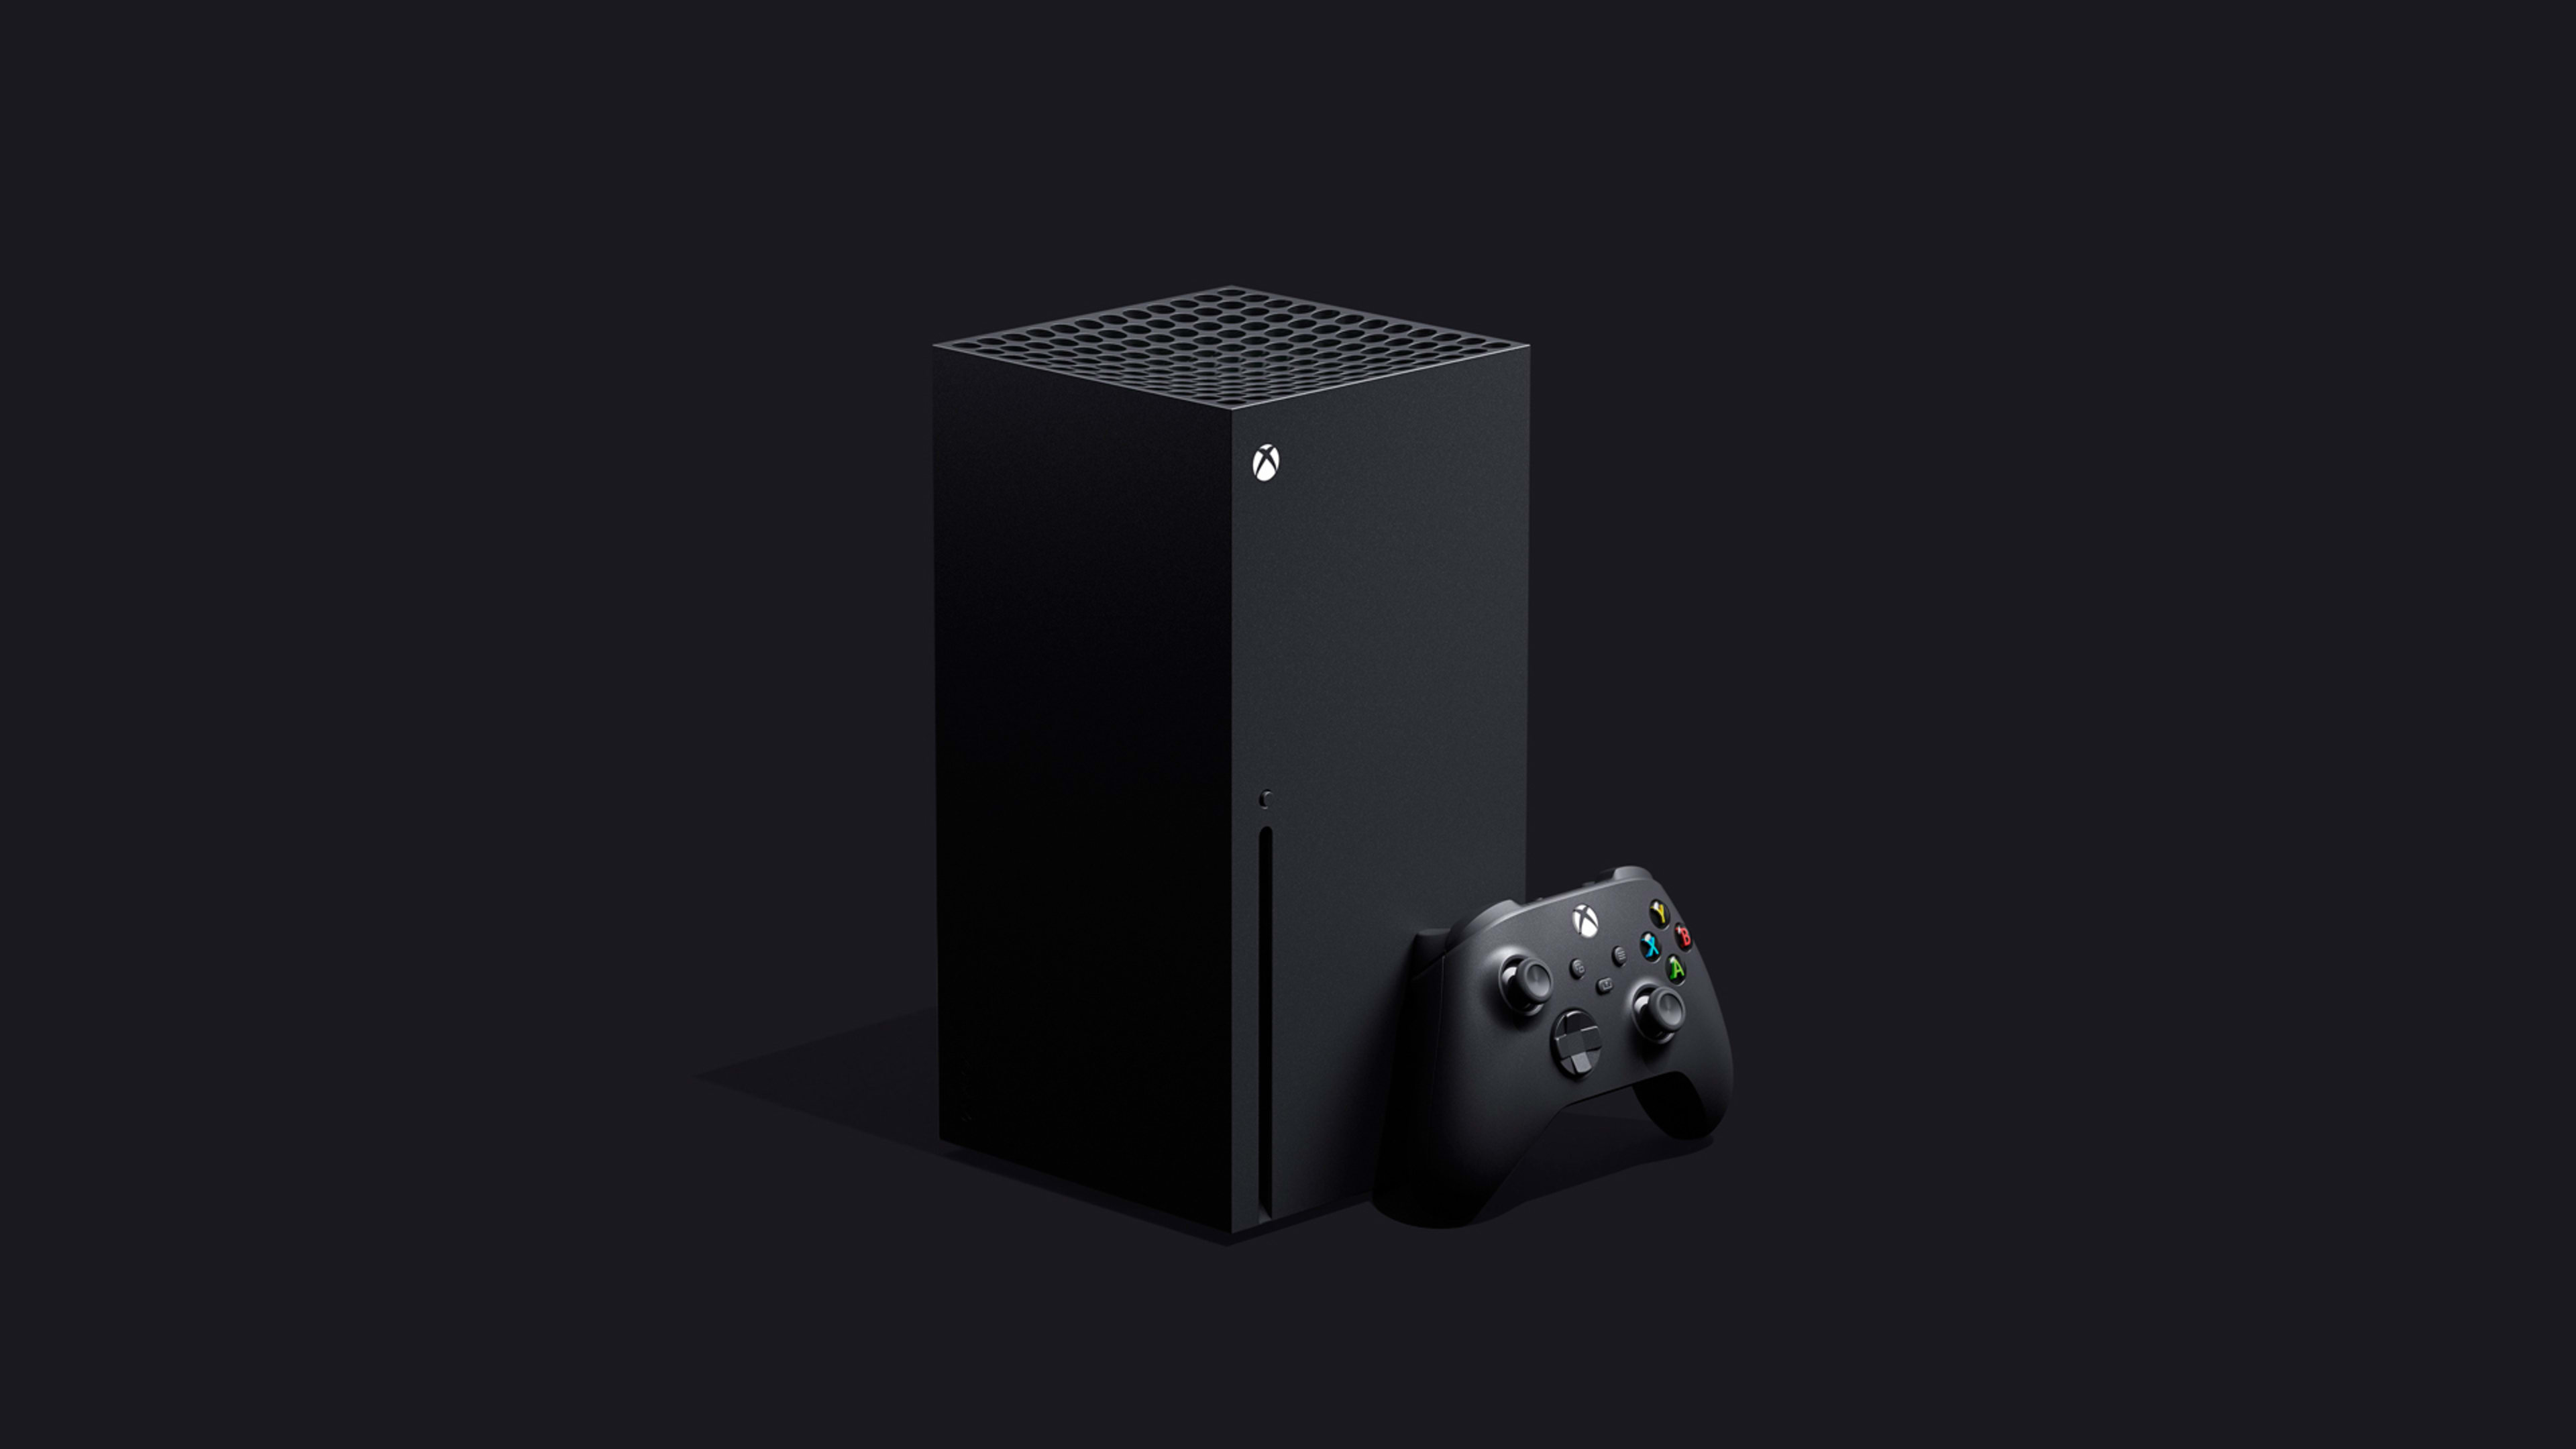 Here’s everything we know about Microsoft’s Xbox Series X